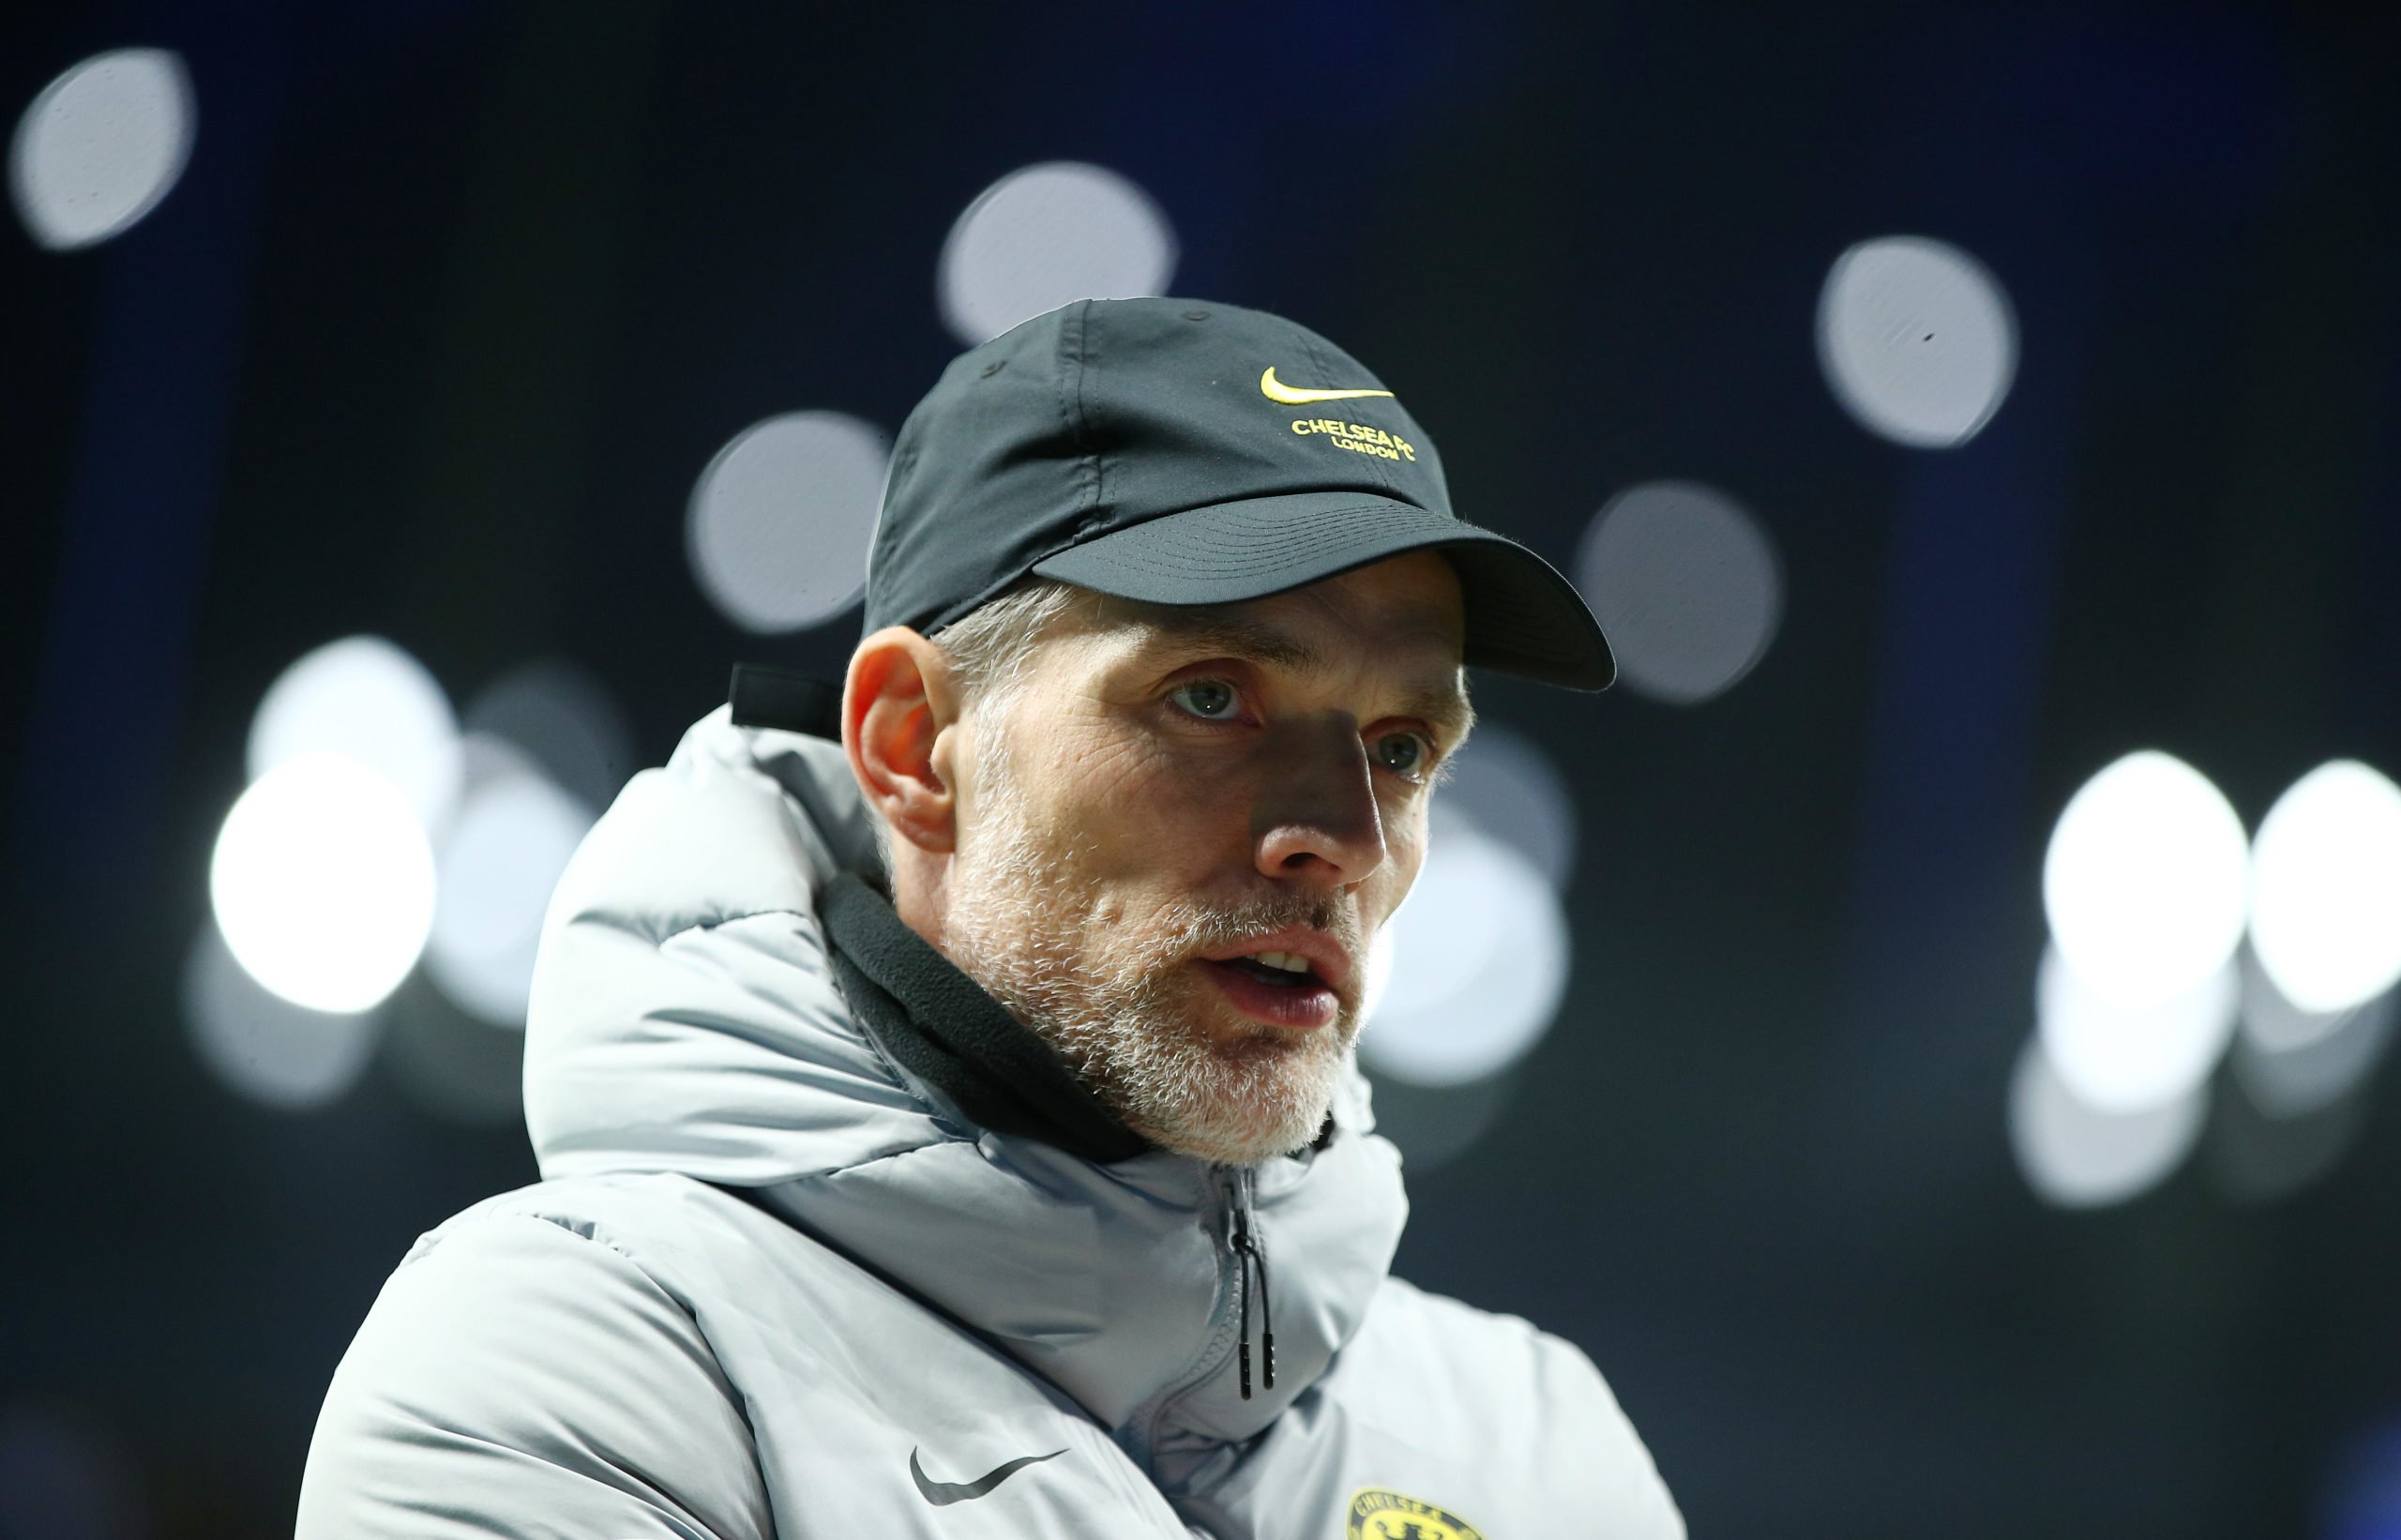 Tuchel should recall Chelsea attacker tonight even though he's not scored in his last eight games - TCC View